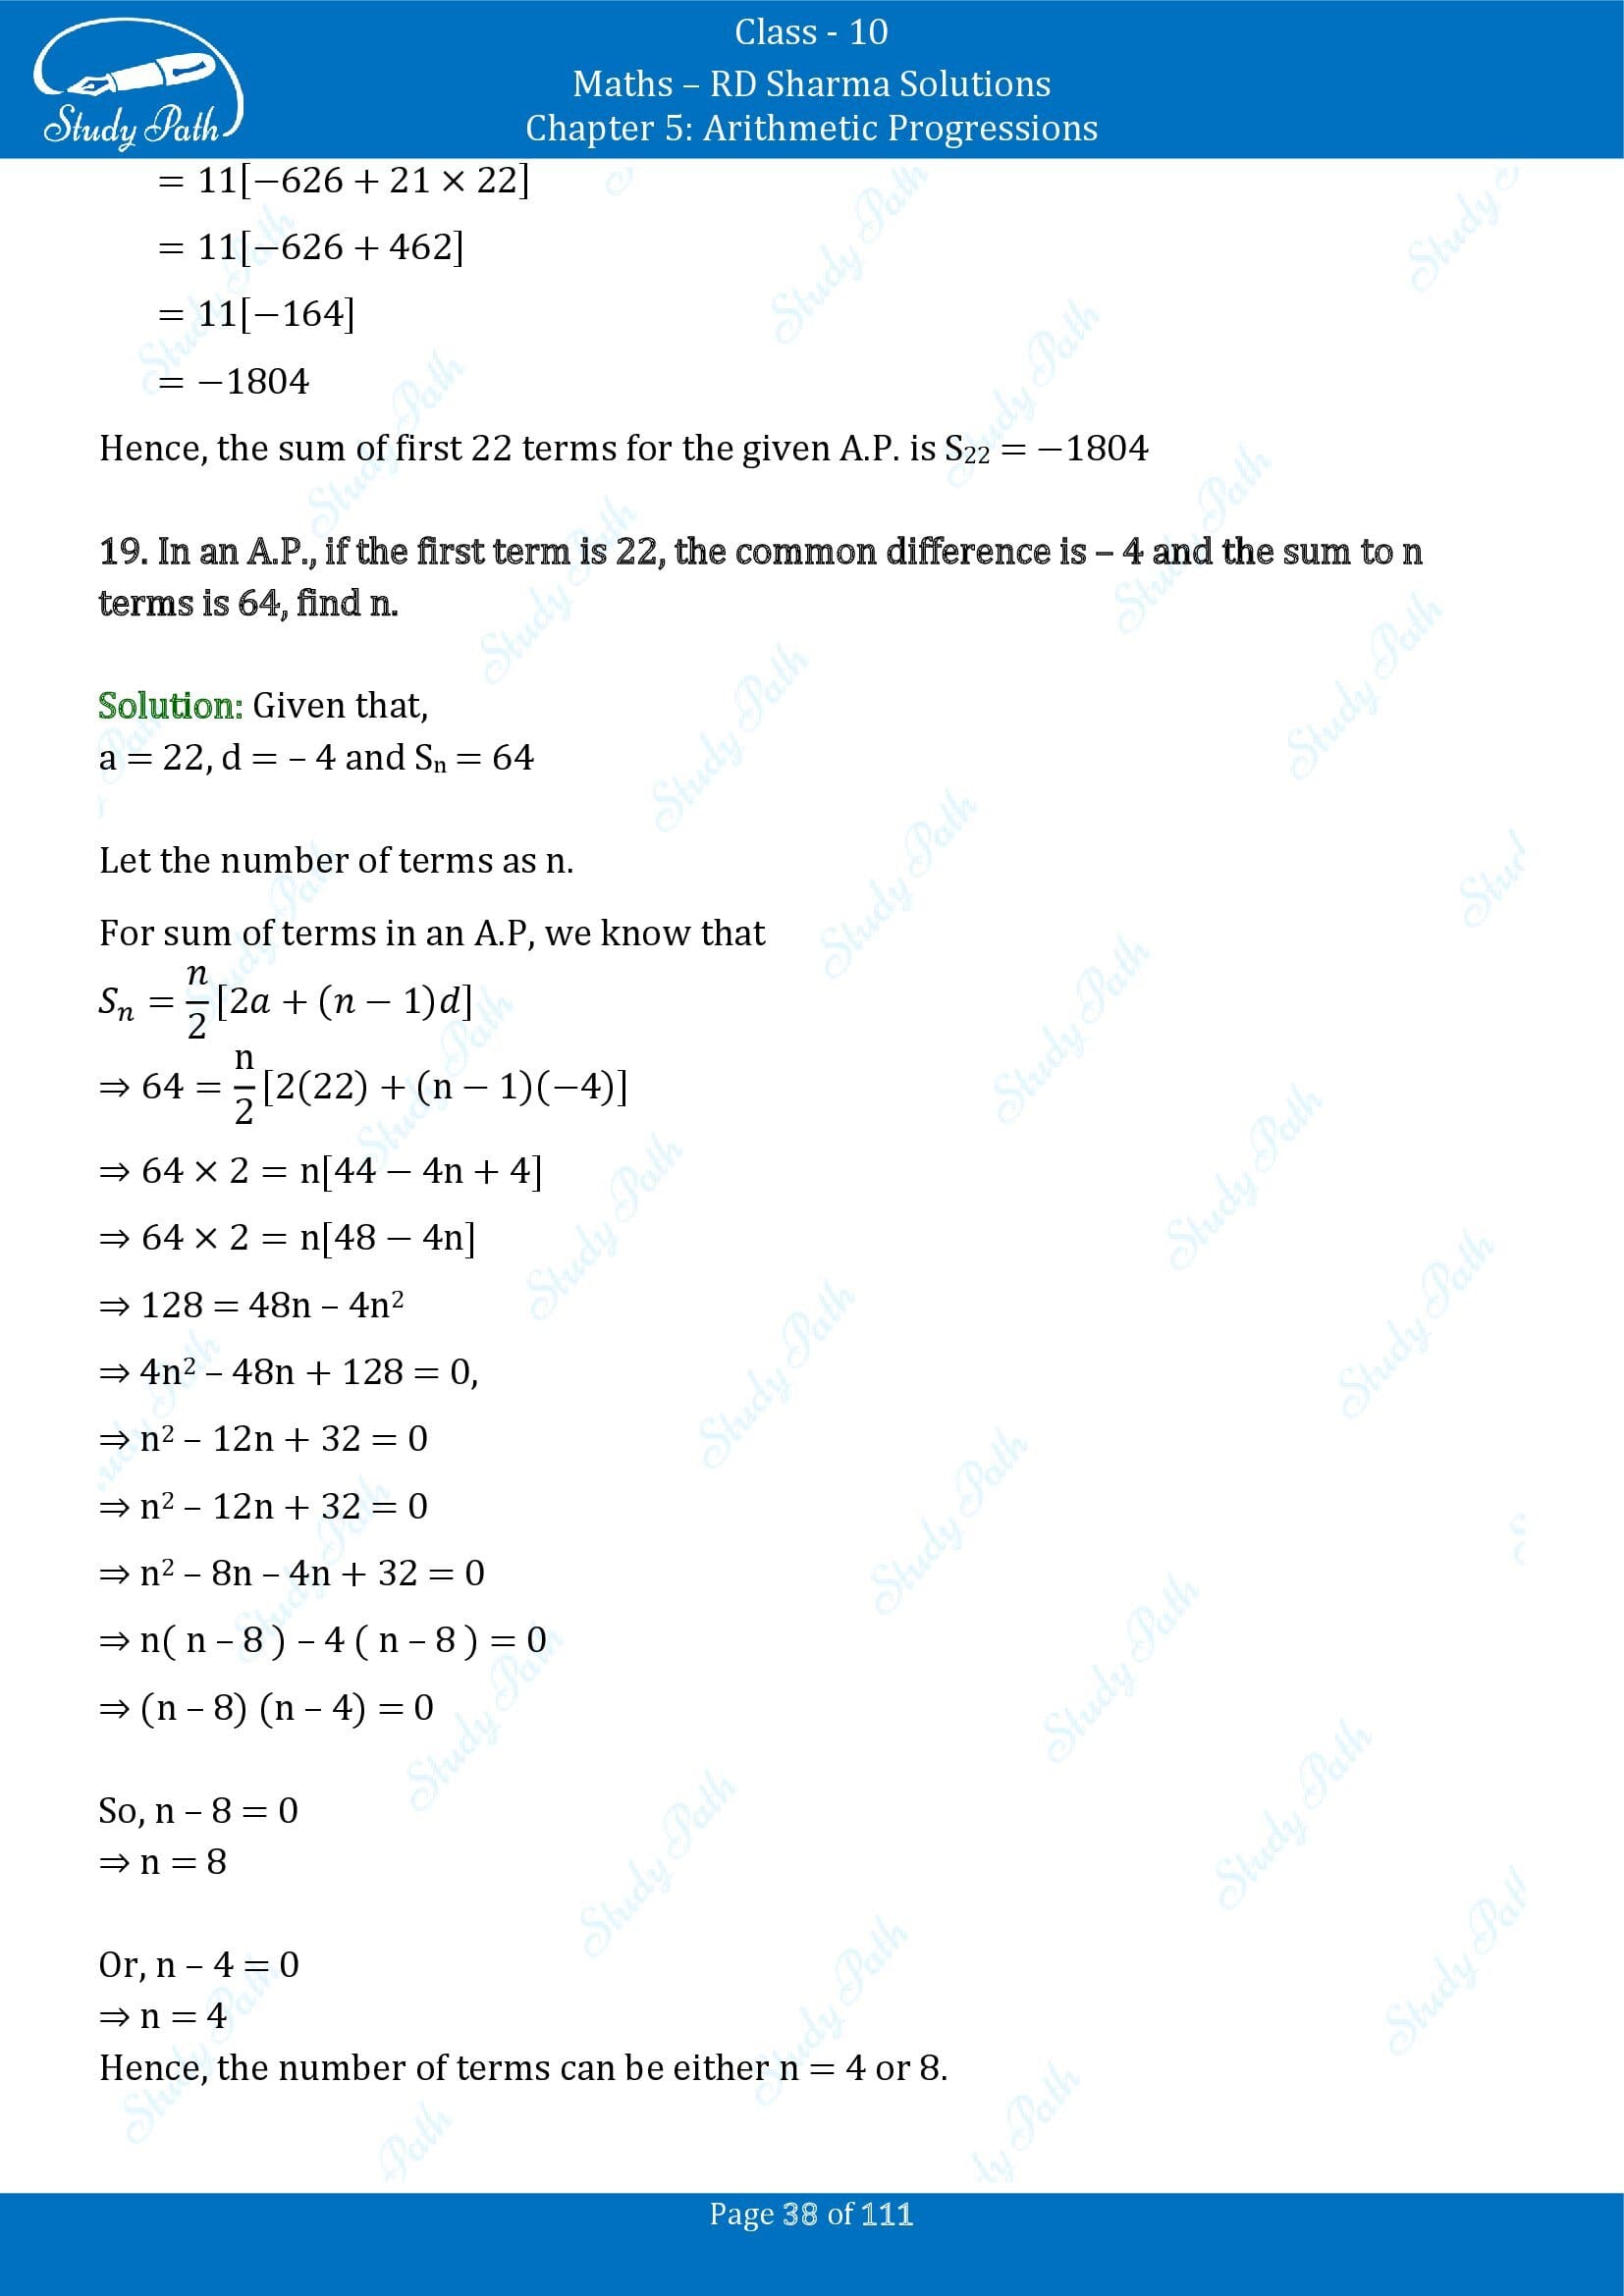 RD Sharma Solutions Class 10 Chapter 5 Arithmetic Progressions Exercise 5.6 00038